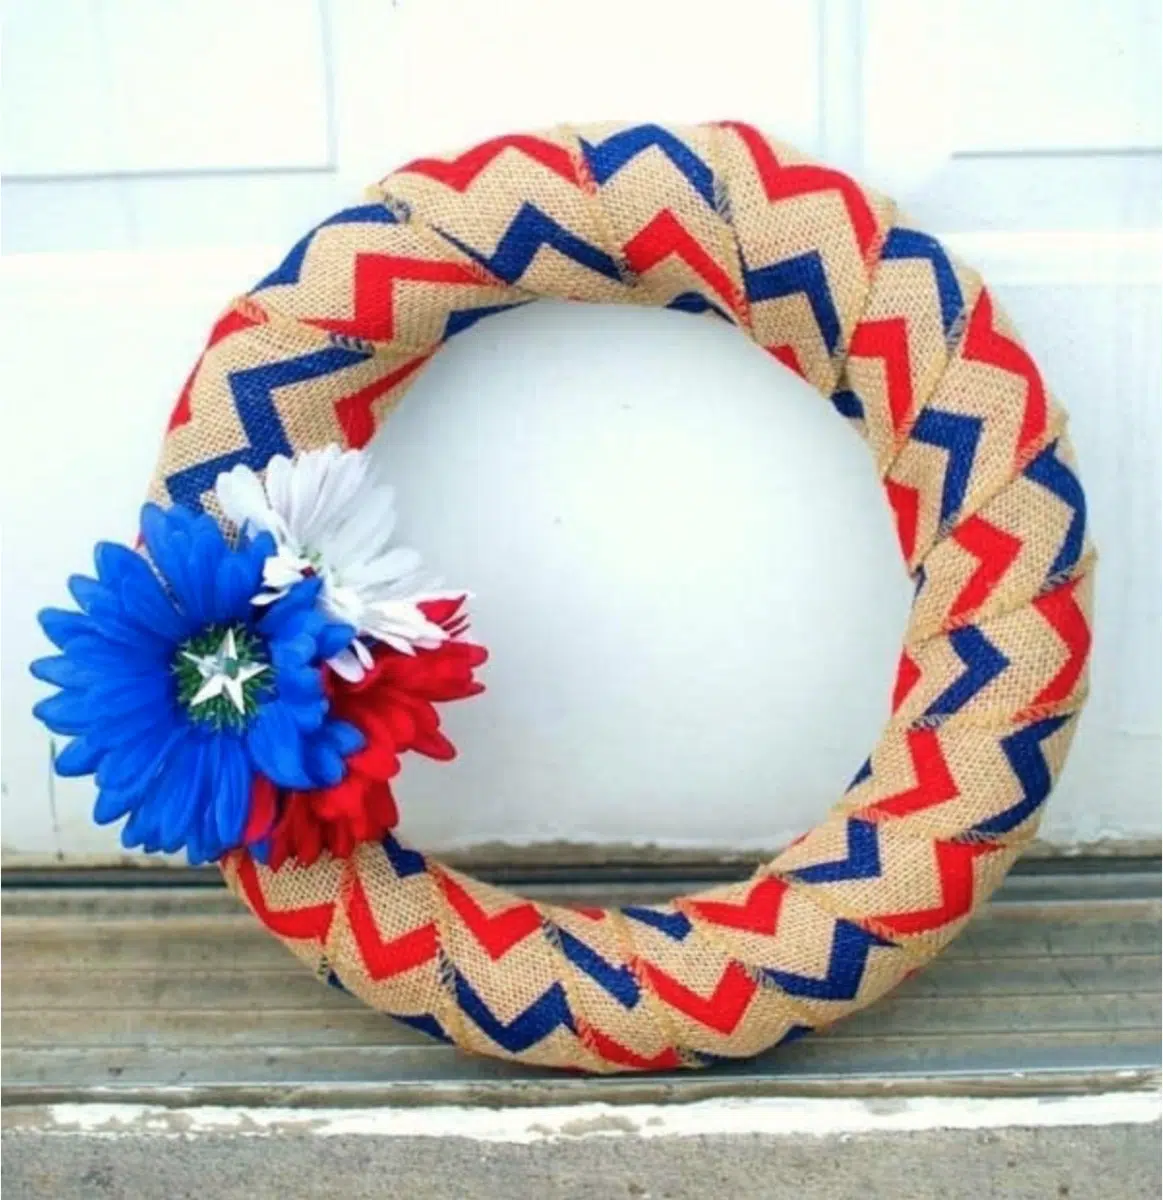 A Fourth of July decorative wreath featuring a red, blue, and beige chevron pattern and adorned with red, white, and blue flowers.